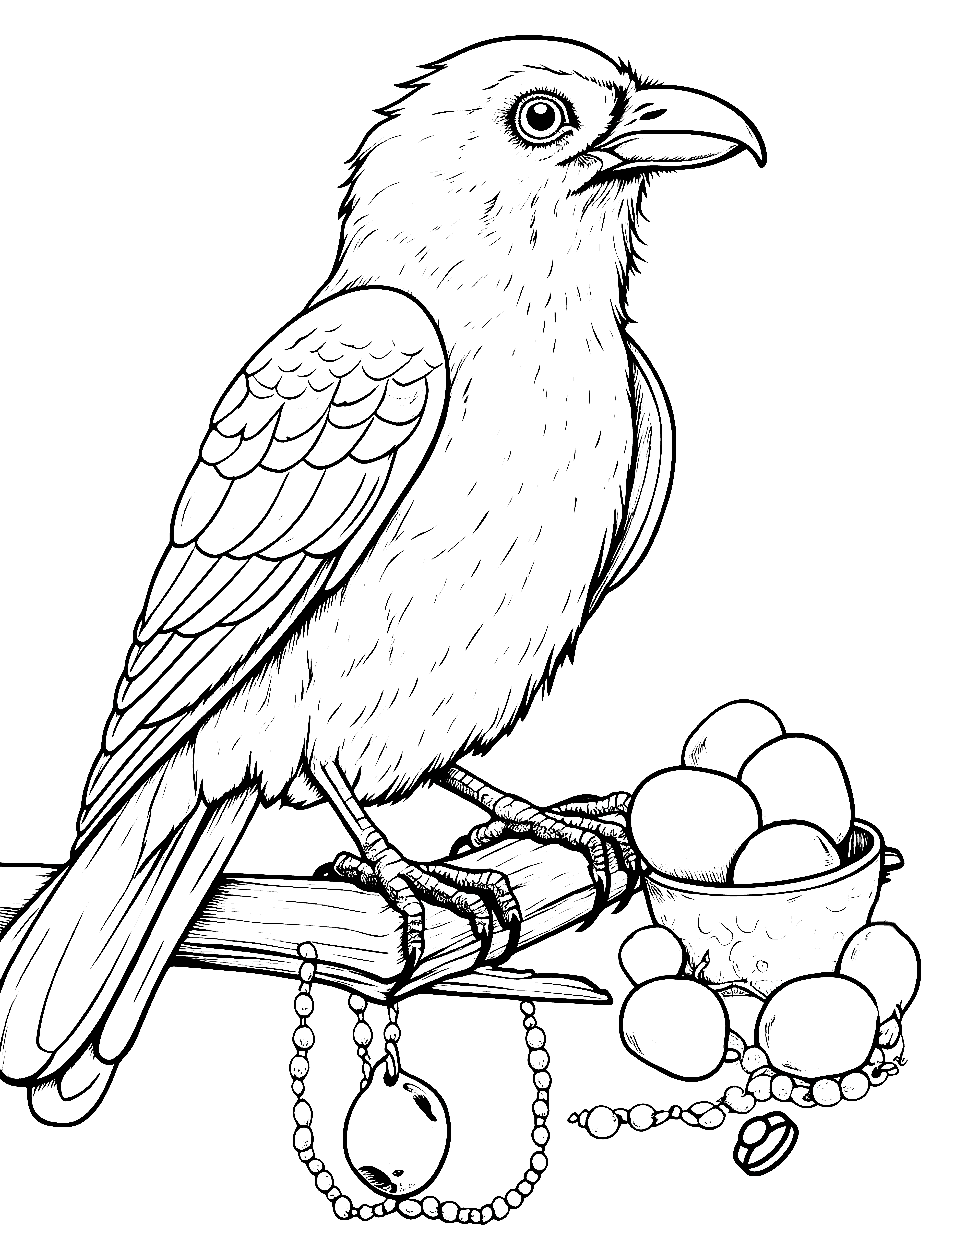 Crow's Treasured Finds Coloring Page - A crow surrounded by shiny trinkets it has found.